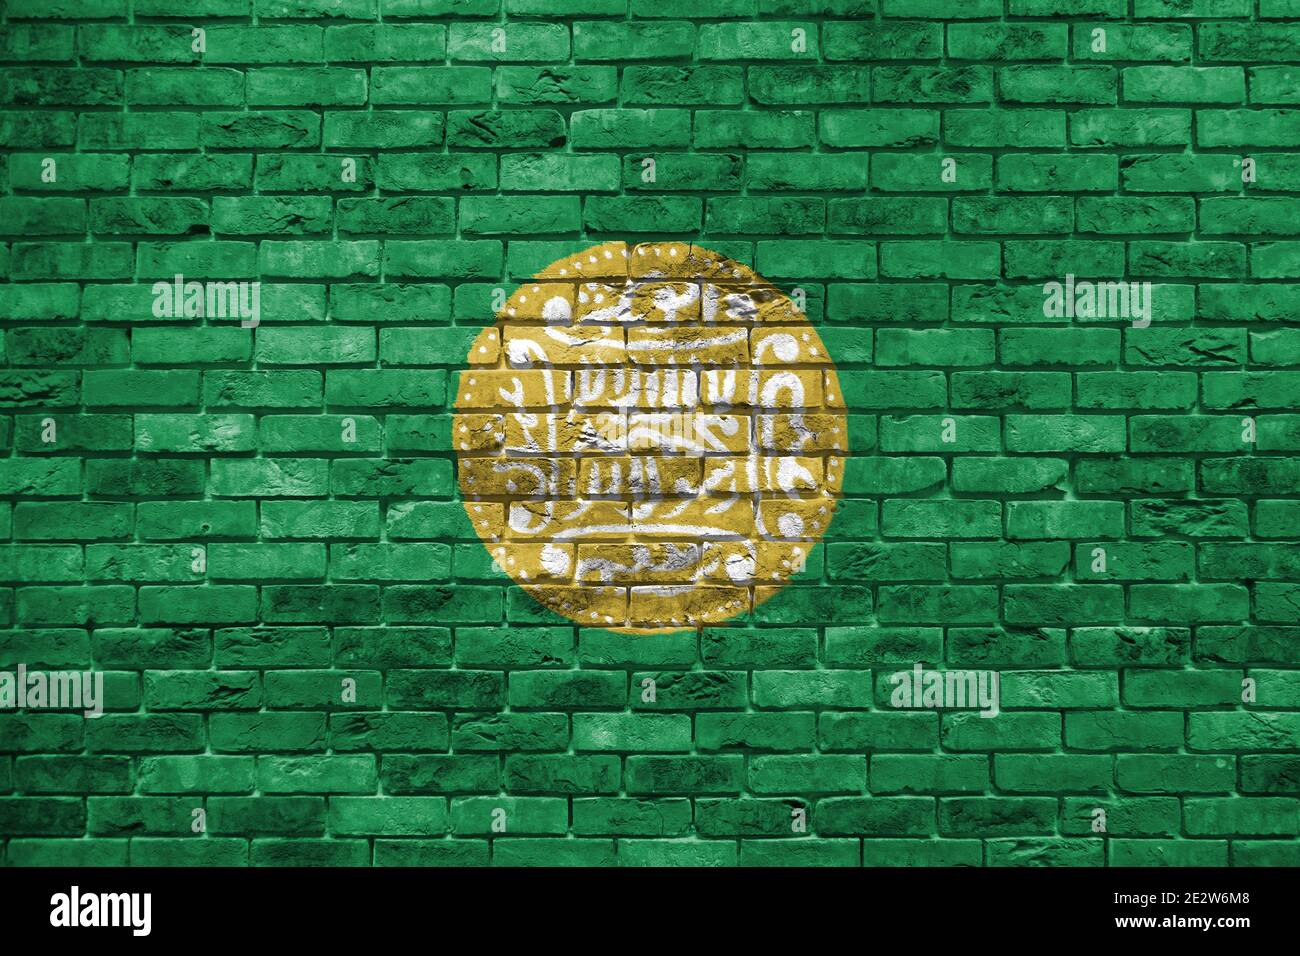 Rohingya flag painted on a brick wall, Background texture Stock Photo